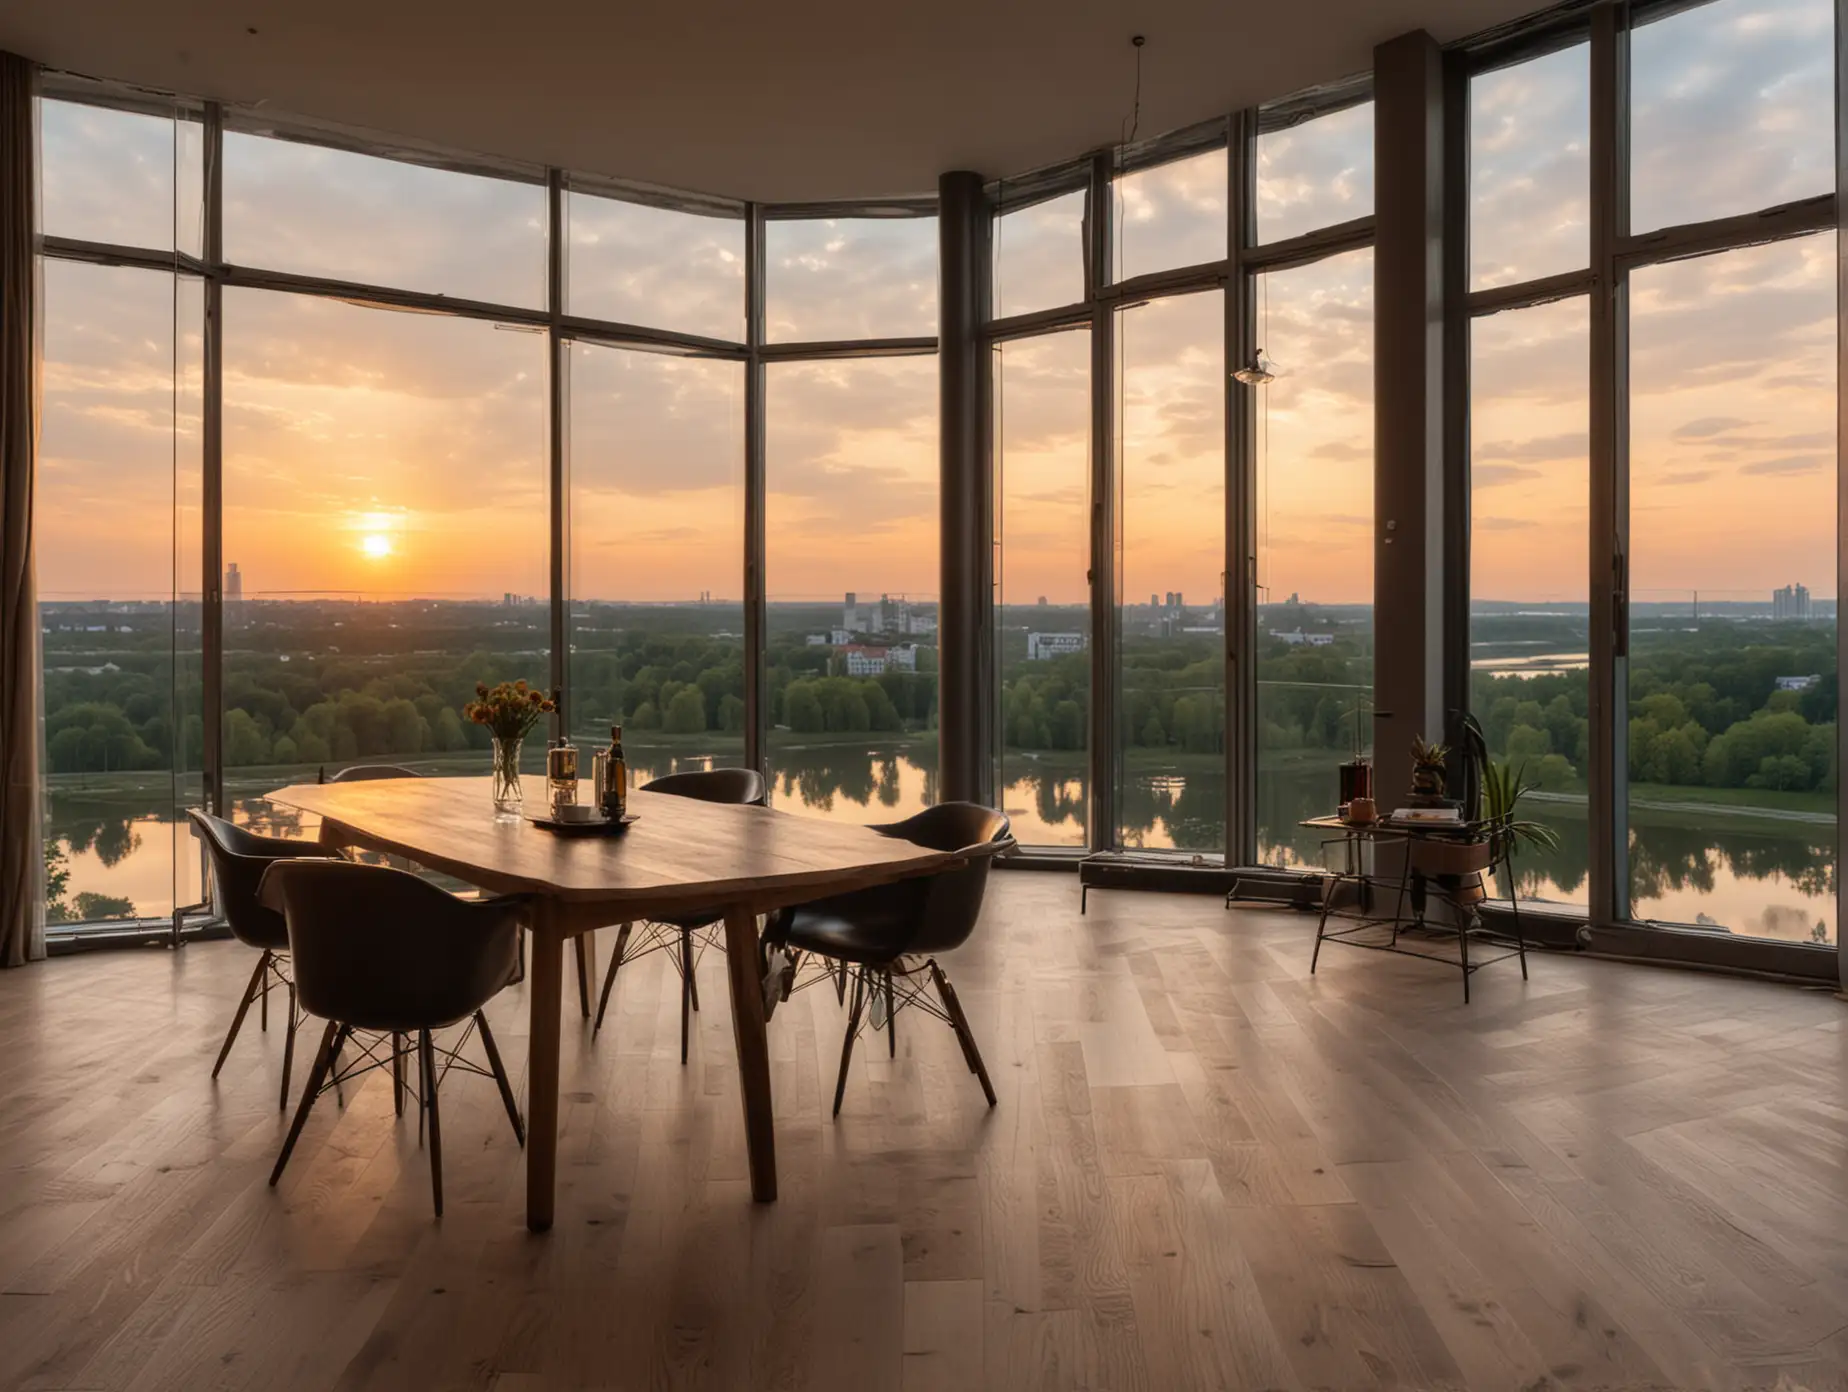 Modern-Penthouse-Interior-with-River-View-at-Sunset